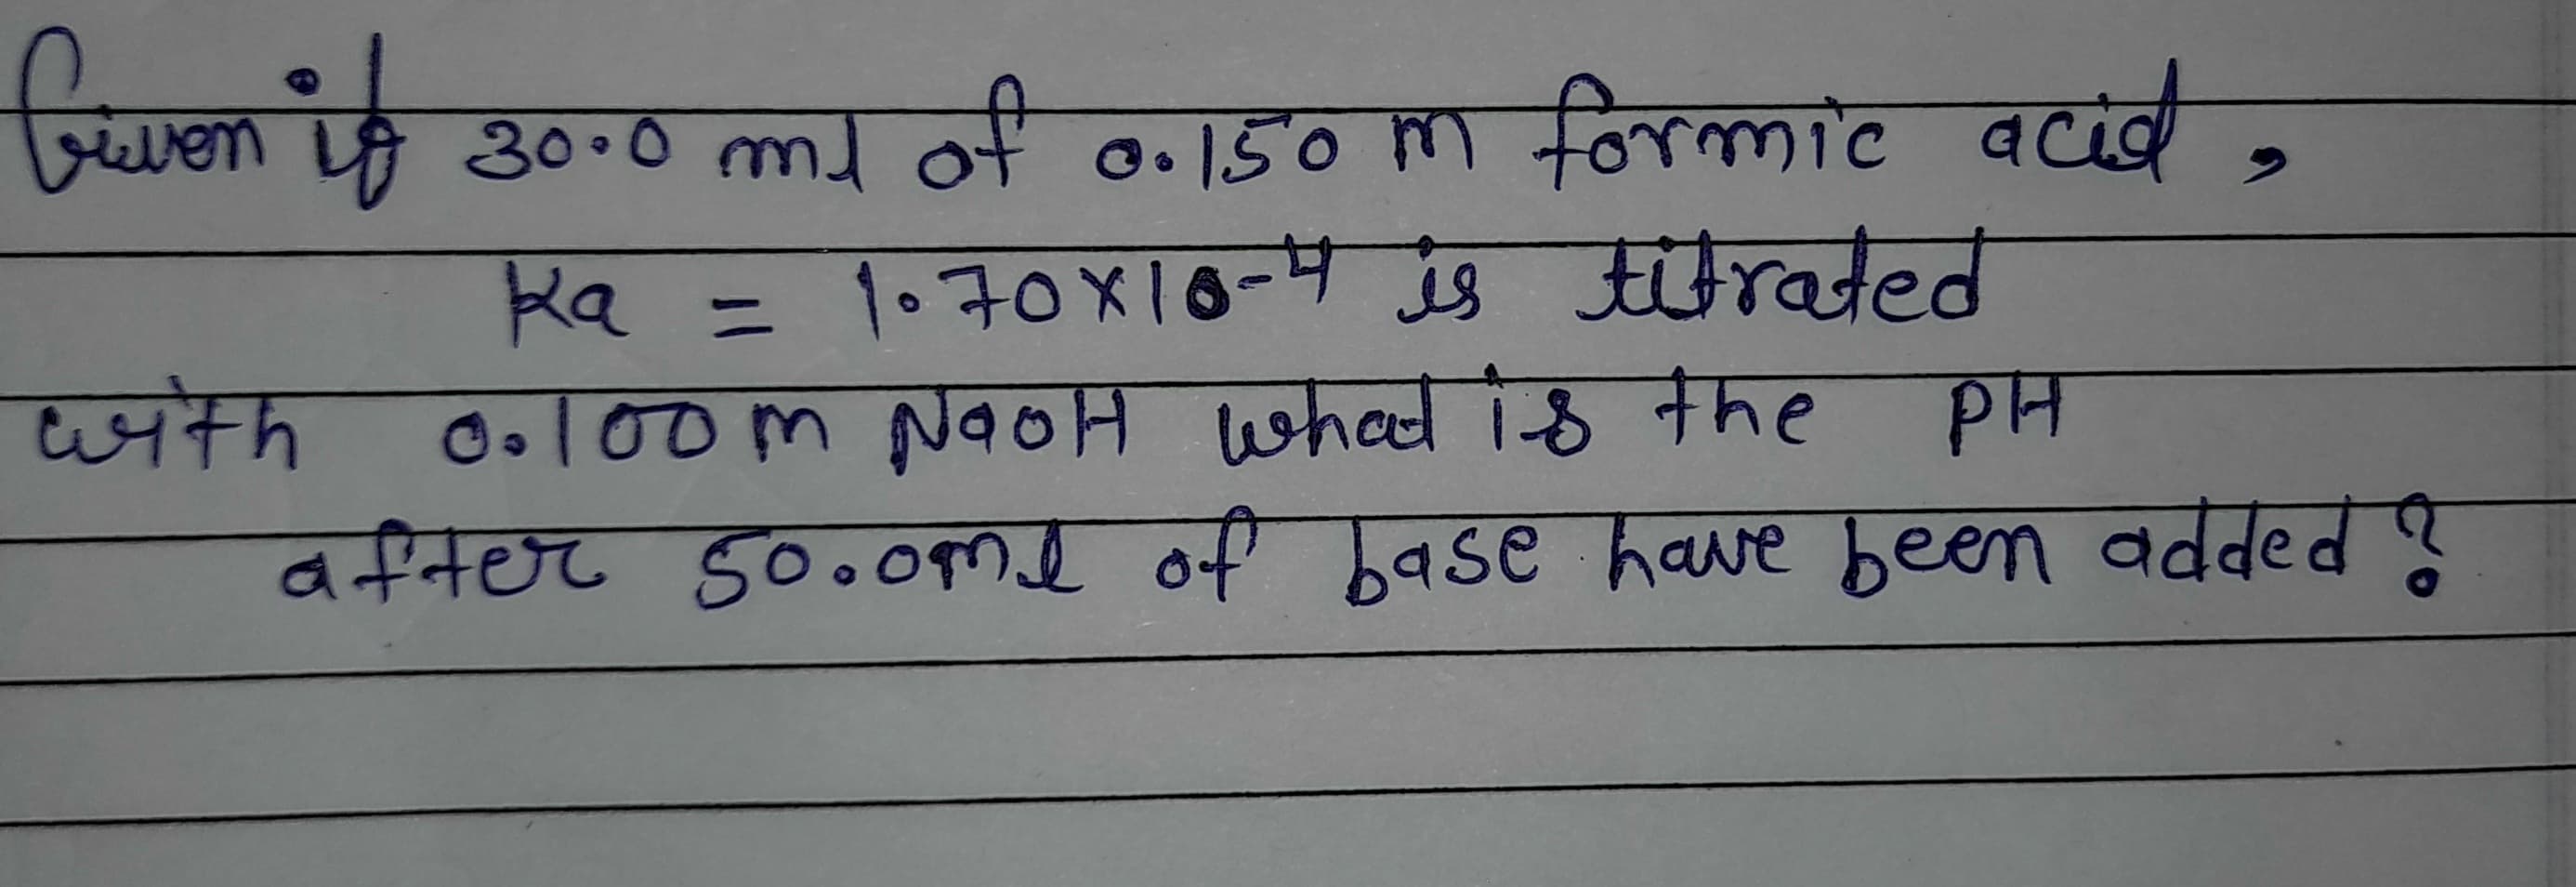 जियका फे
०.150 M\ +ठिततलाट वटांब
ka = 1.70X16-4 is titrated
0.100m NaoH what i-8 the
after 5oome of base have been added ?
प 30.0 mml of a. ls0 ni ठिककाट वटाव ,
m formic acid
ieven
्जम्म
PH
